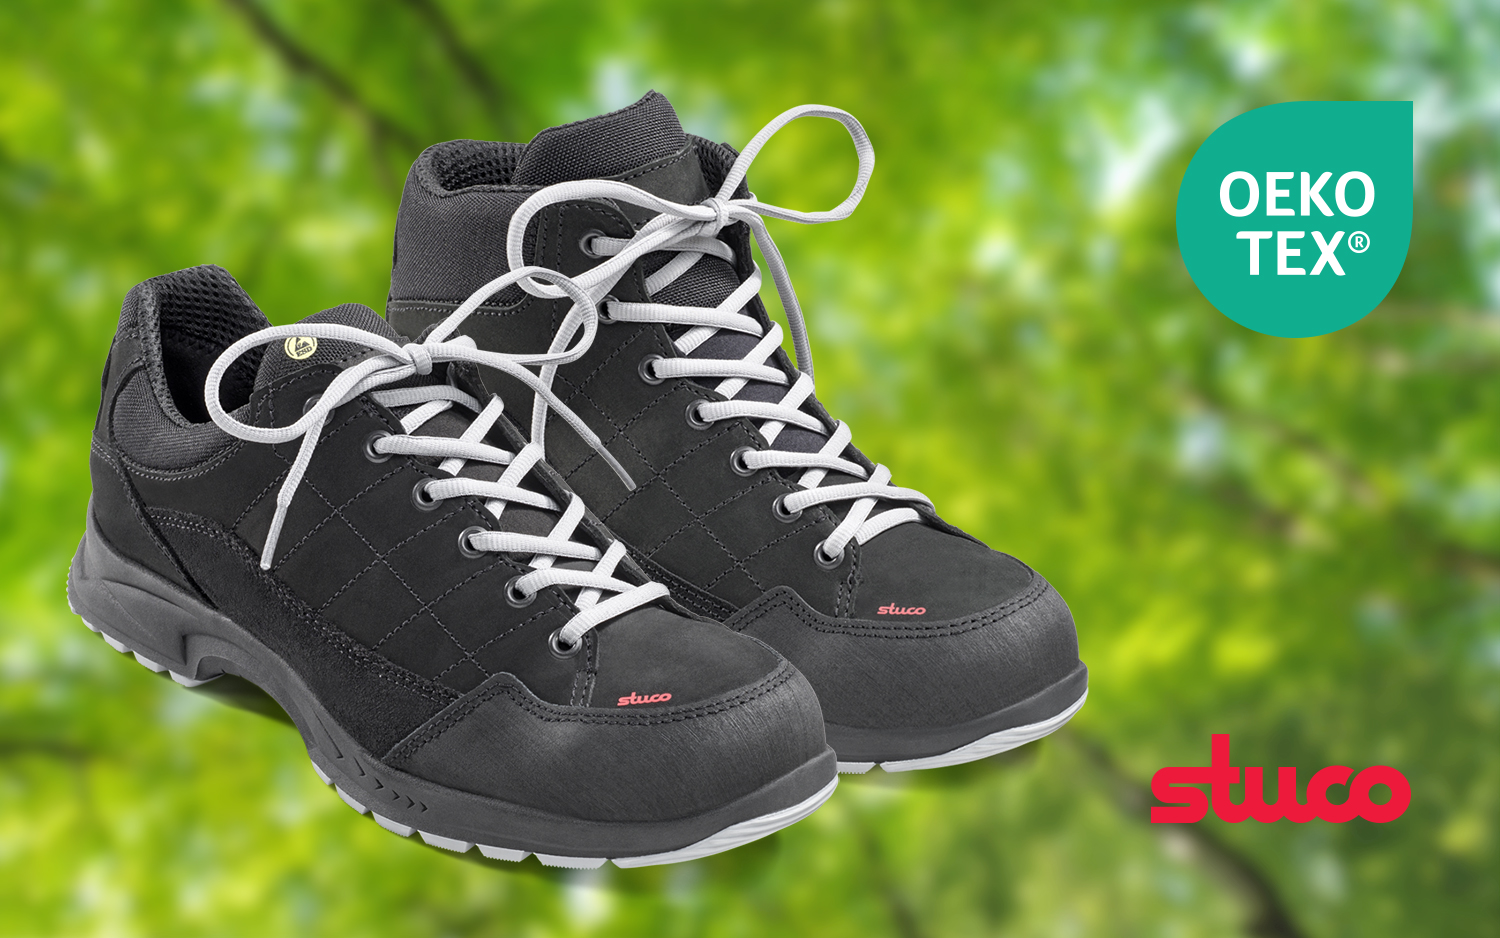 The world's first safety and work shoes with the OEKO-TEX® label